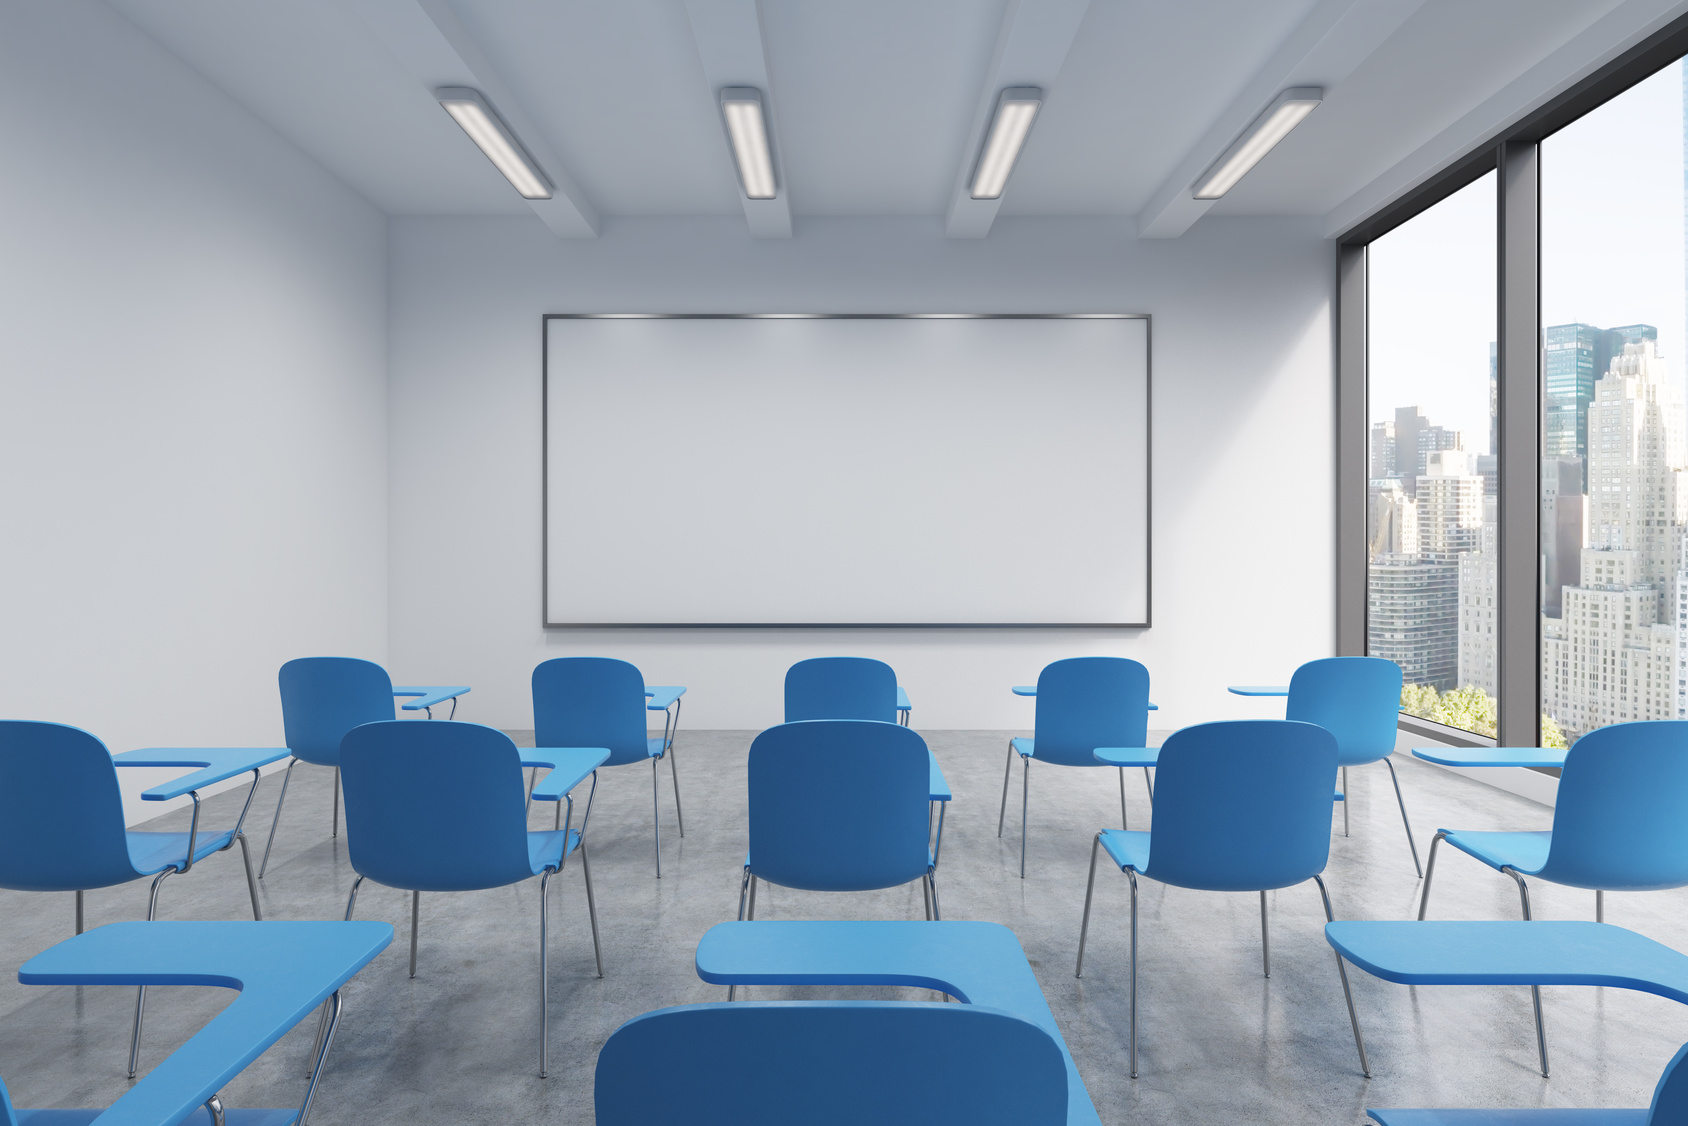 A classroom or presentation room in a modern university or fancy office. Blue chairs, a whiteboard on the wall and panoramic windows with New York view. 3D rendering.